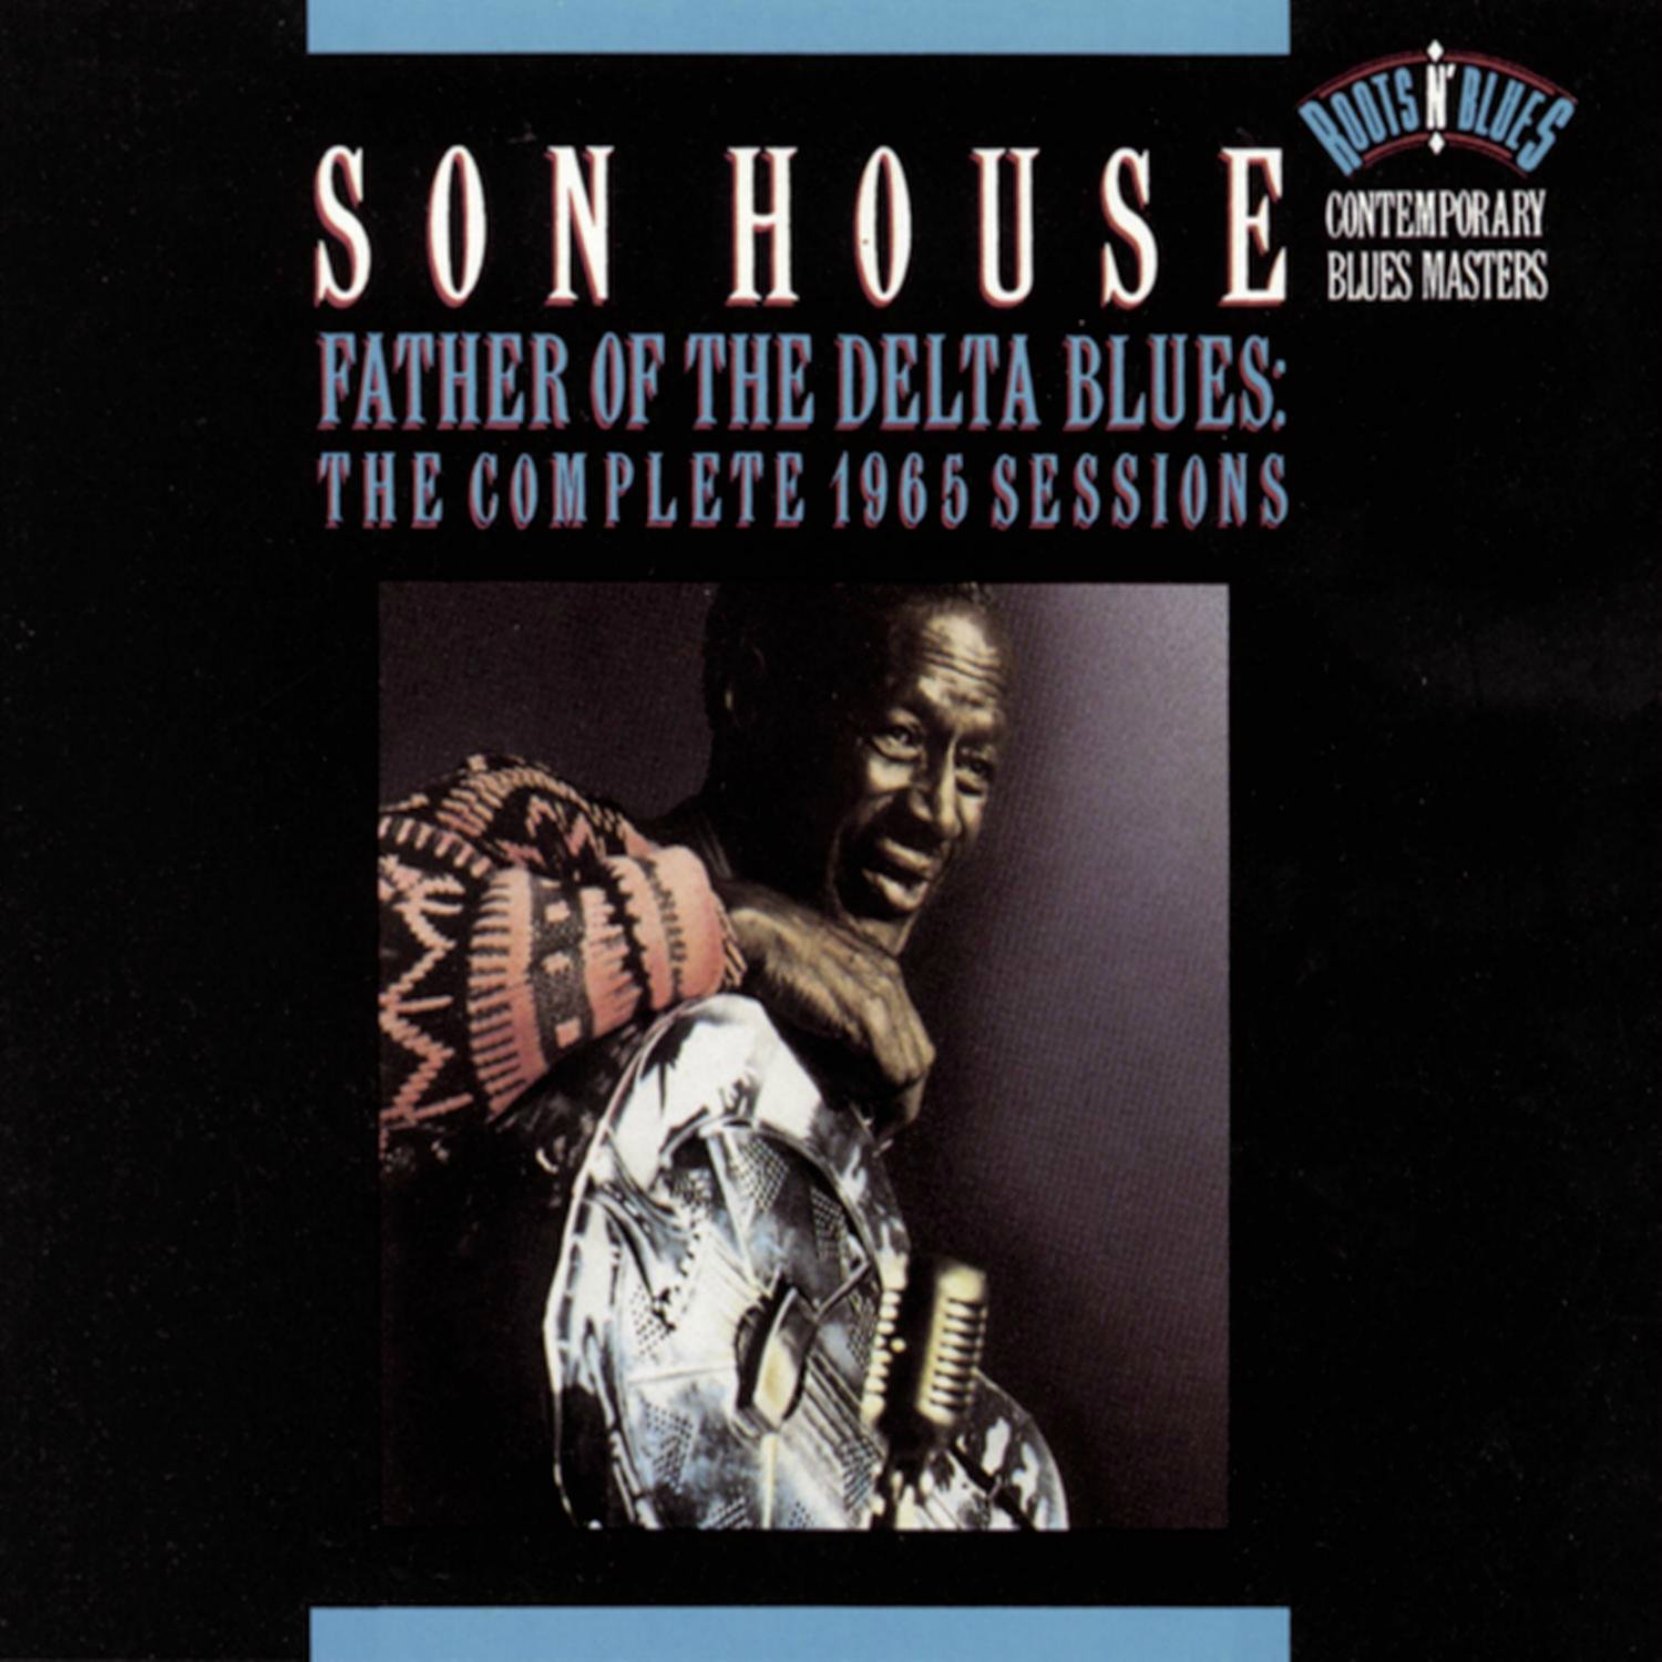 CD cover, Father of the Delta Blues: The Complete 1965 Sessions, by Son House, from the 1965 Columbia Records sessions